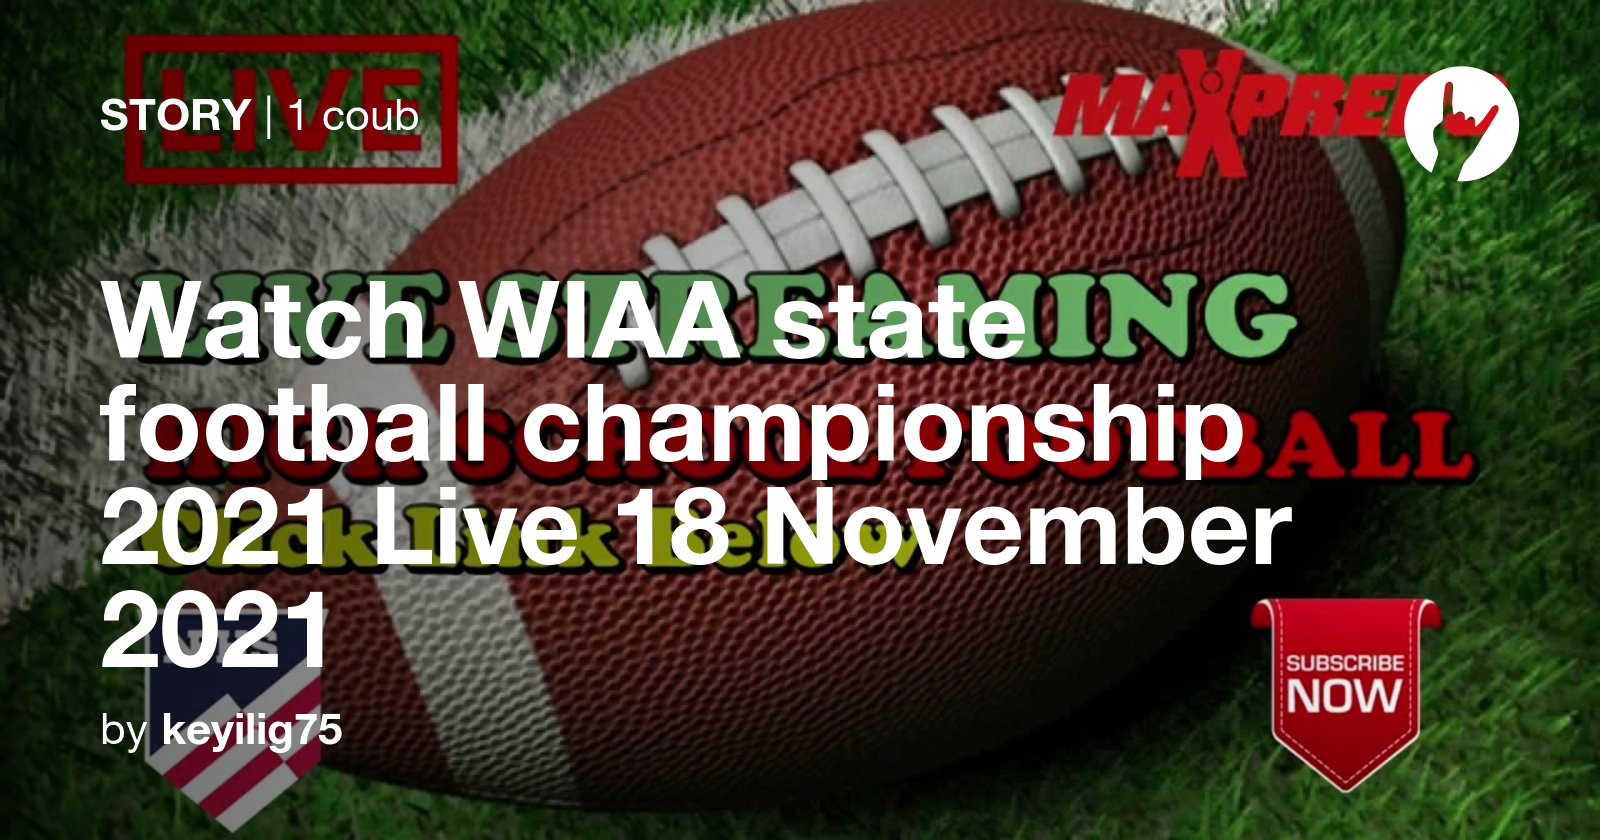 Watch WIAA state football championship 2021 Live 18 November 2021 Coub